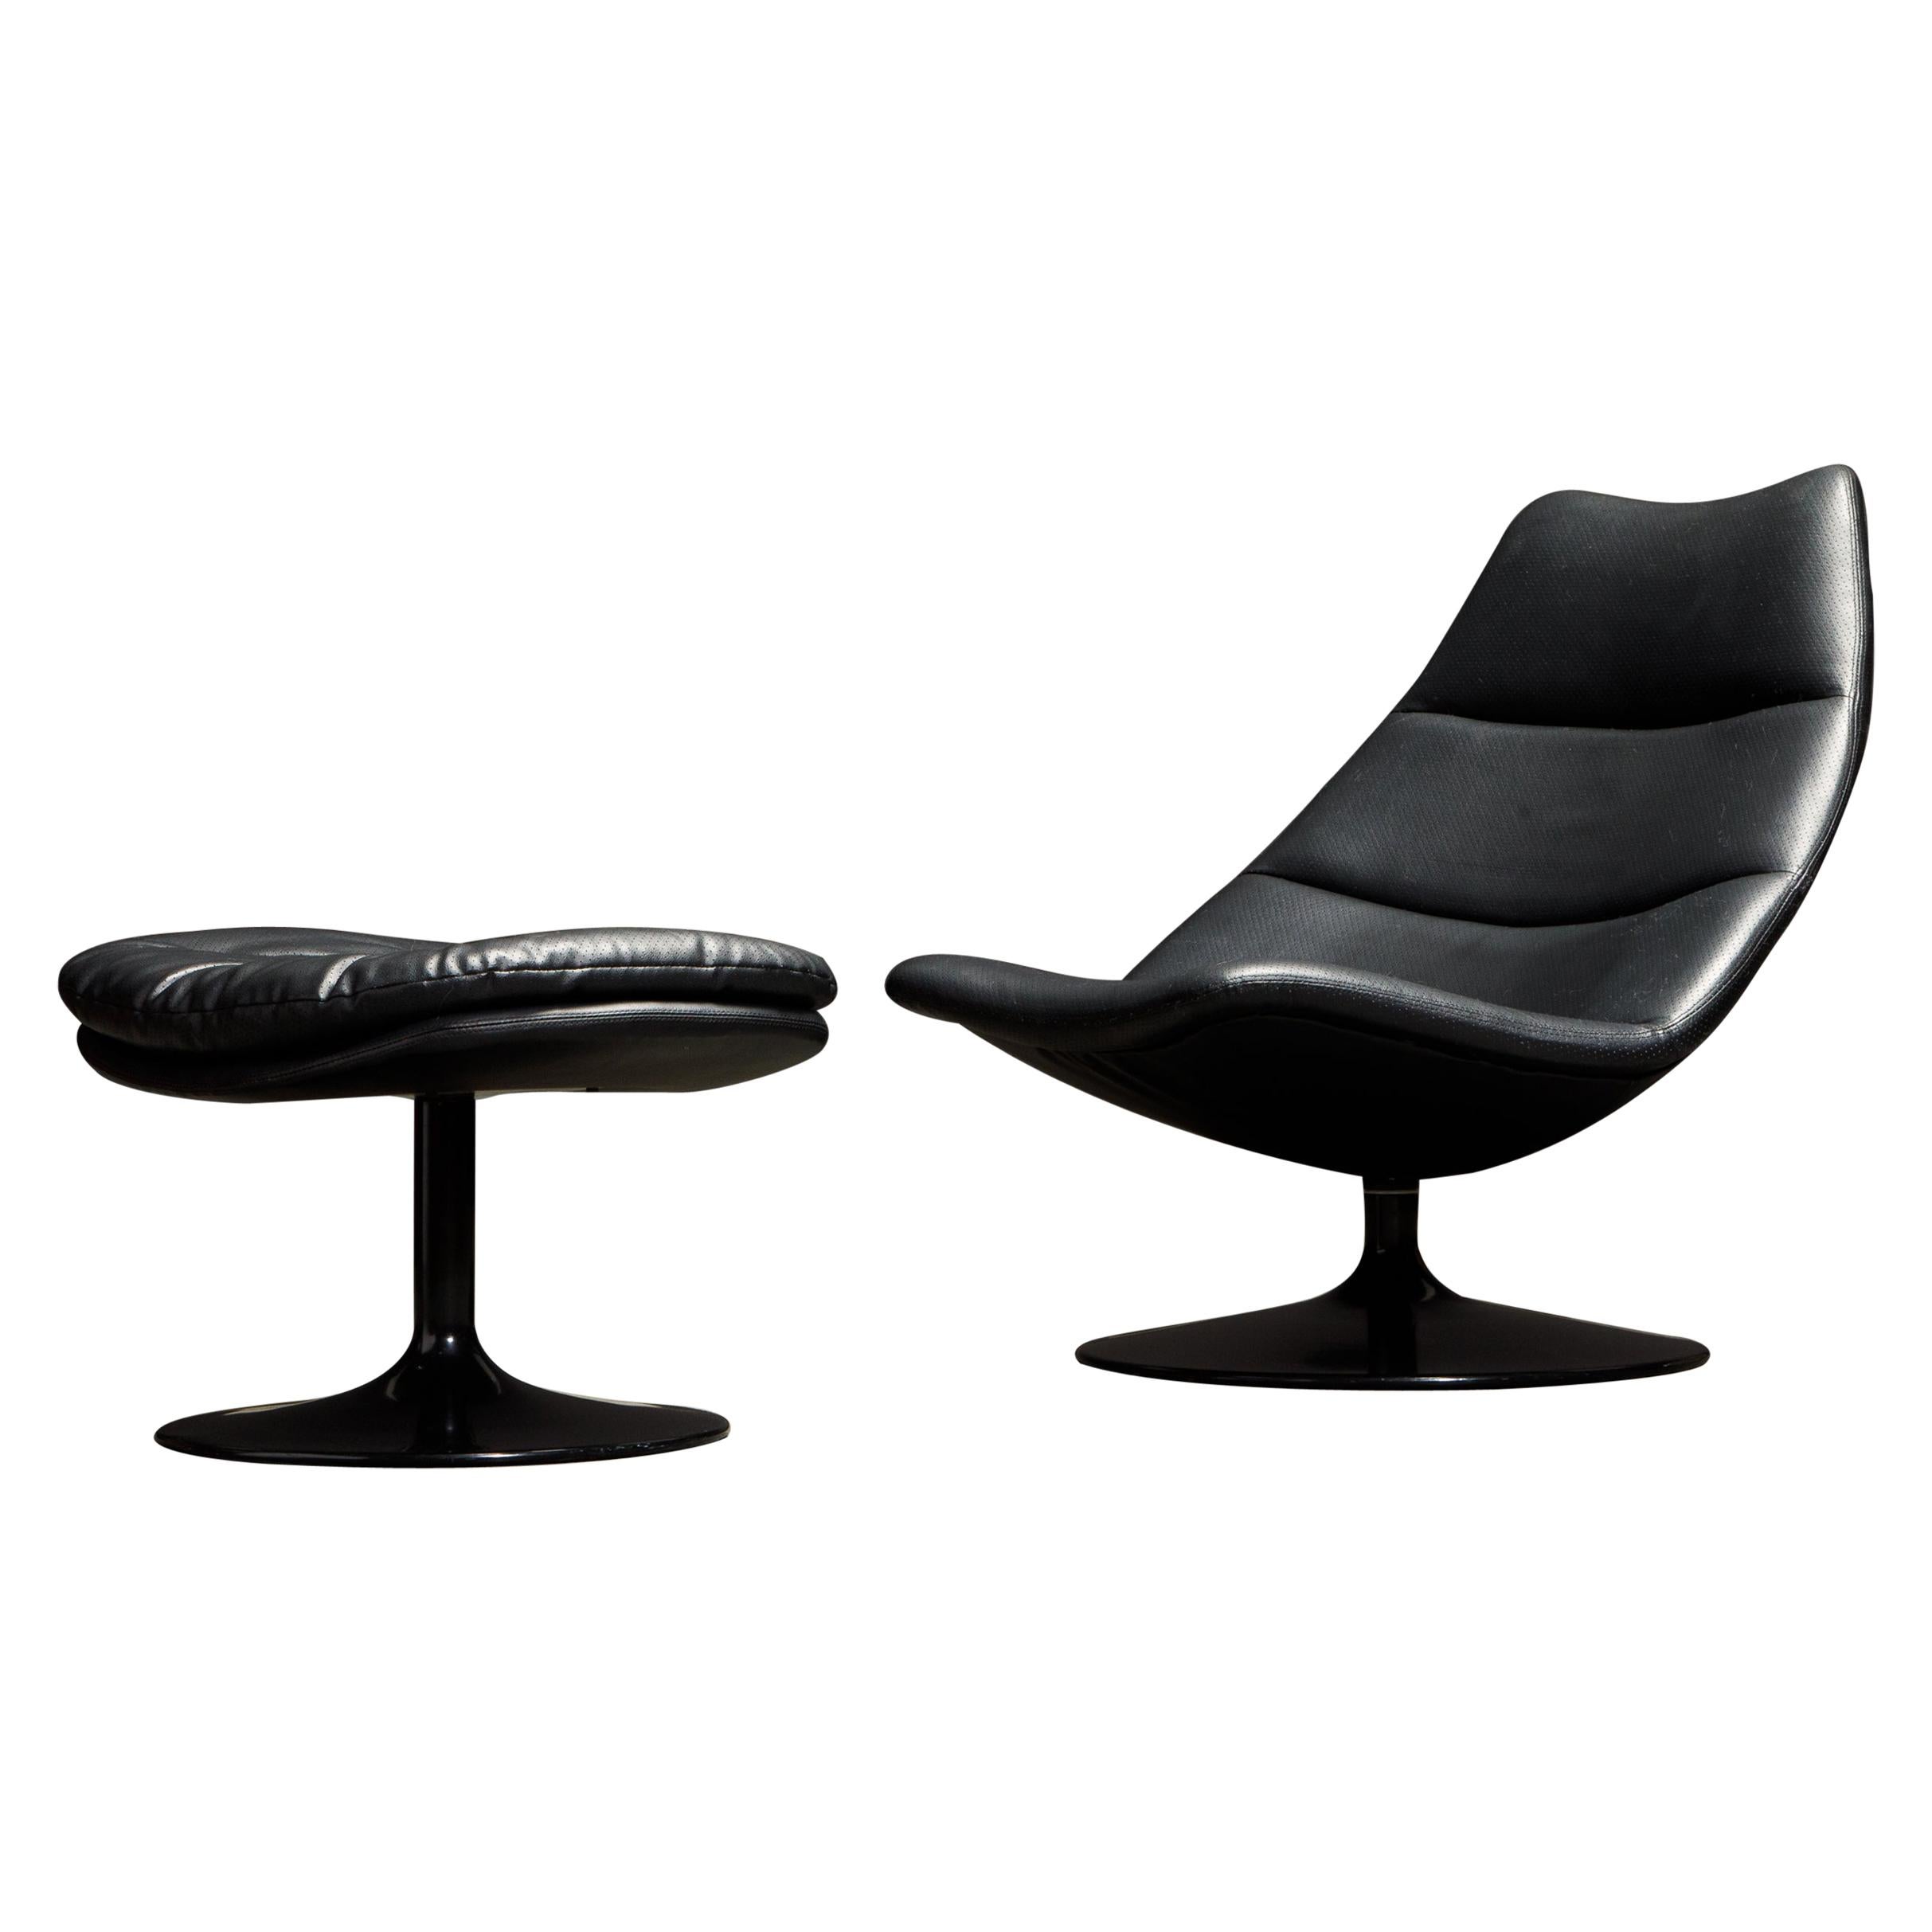 Geoffrey Harcourt for Artifort Leather Swivel Lounge Chair and Ottoman, c. 1980s